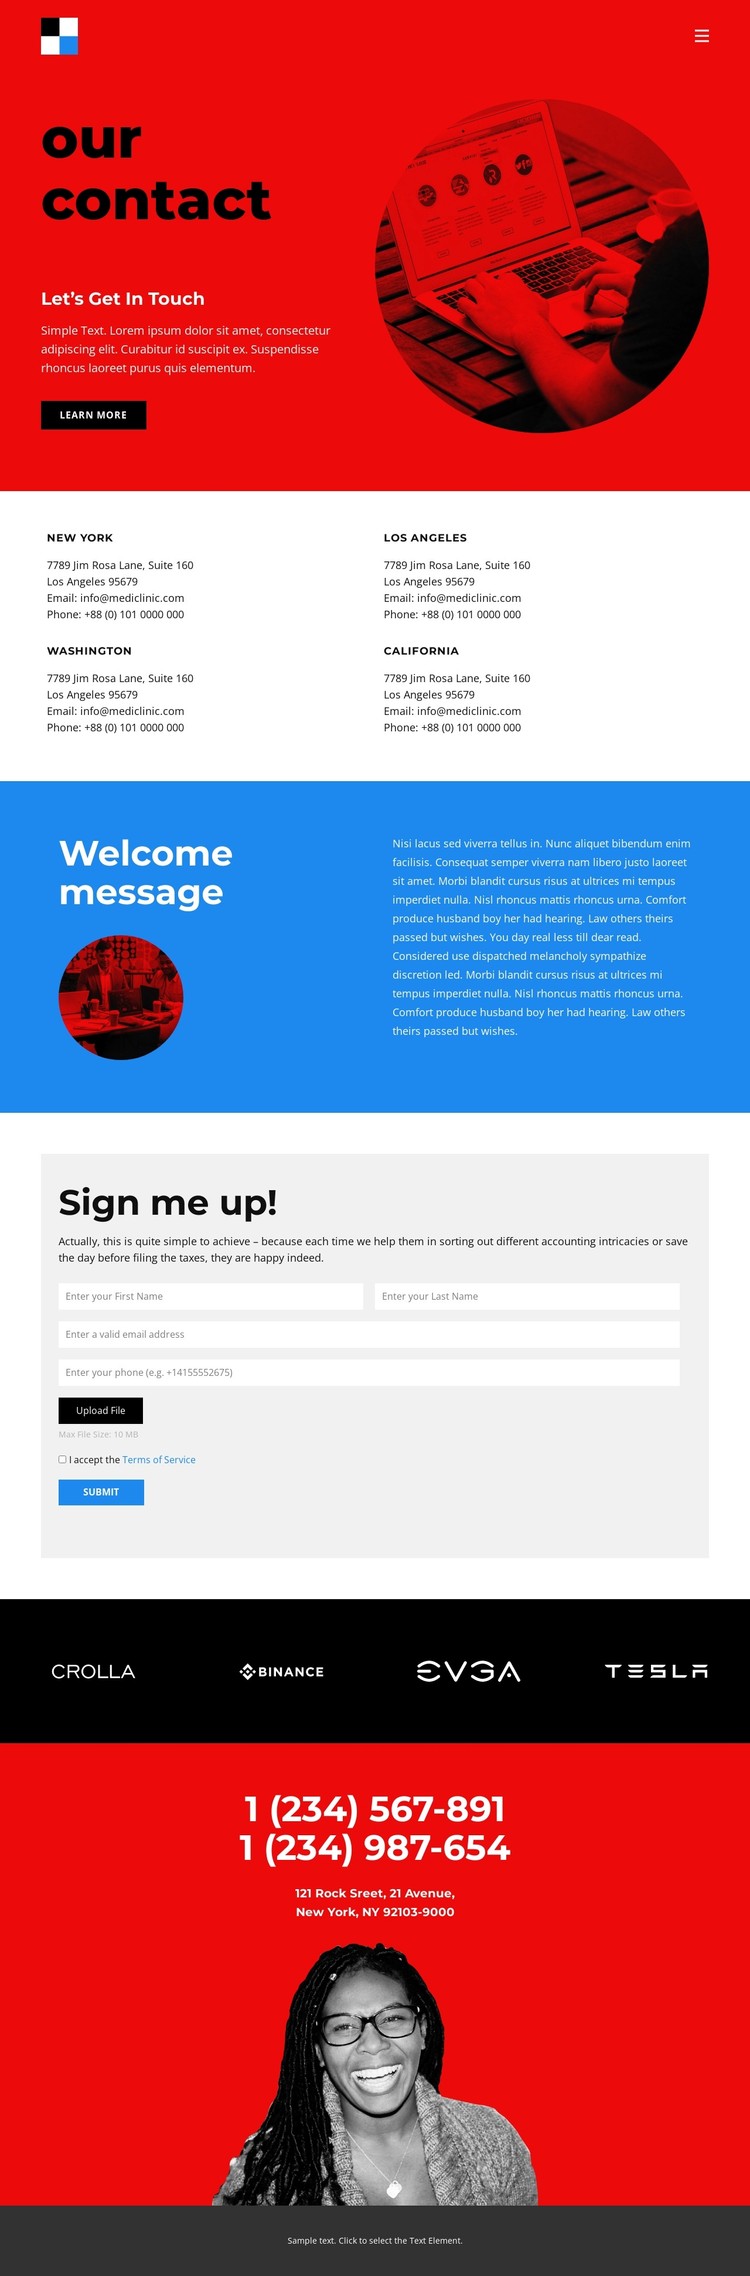 Branding agency contacts Static Site Generator